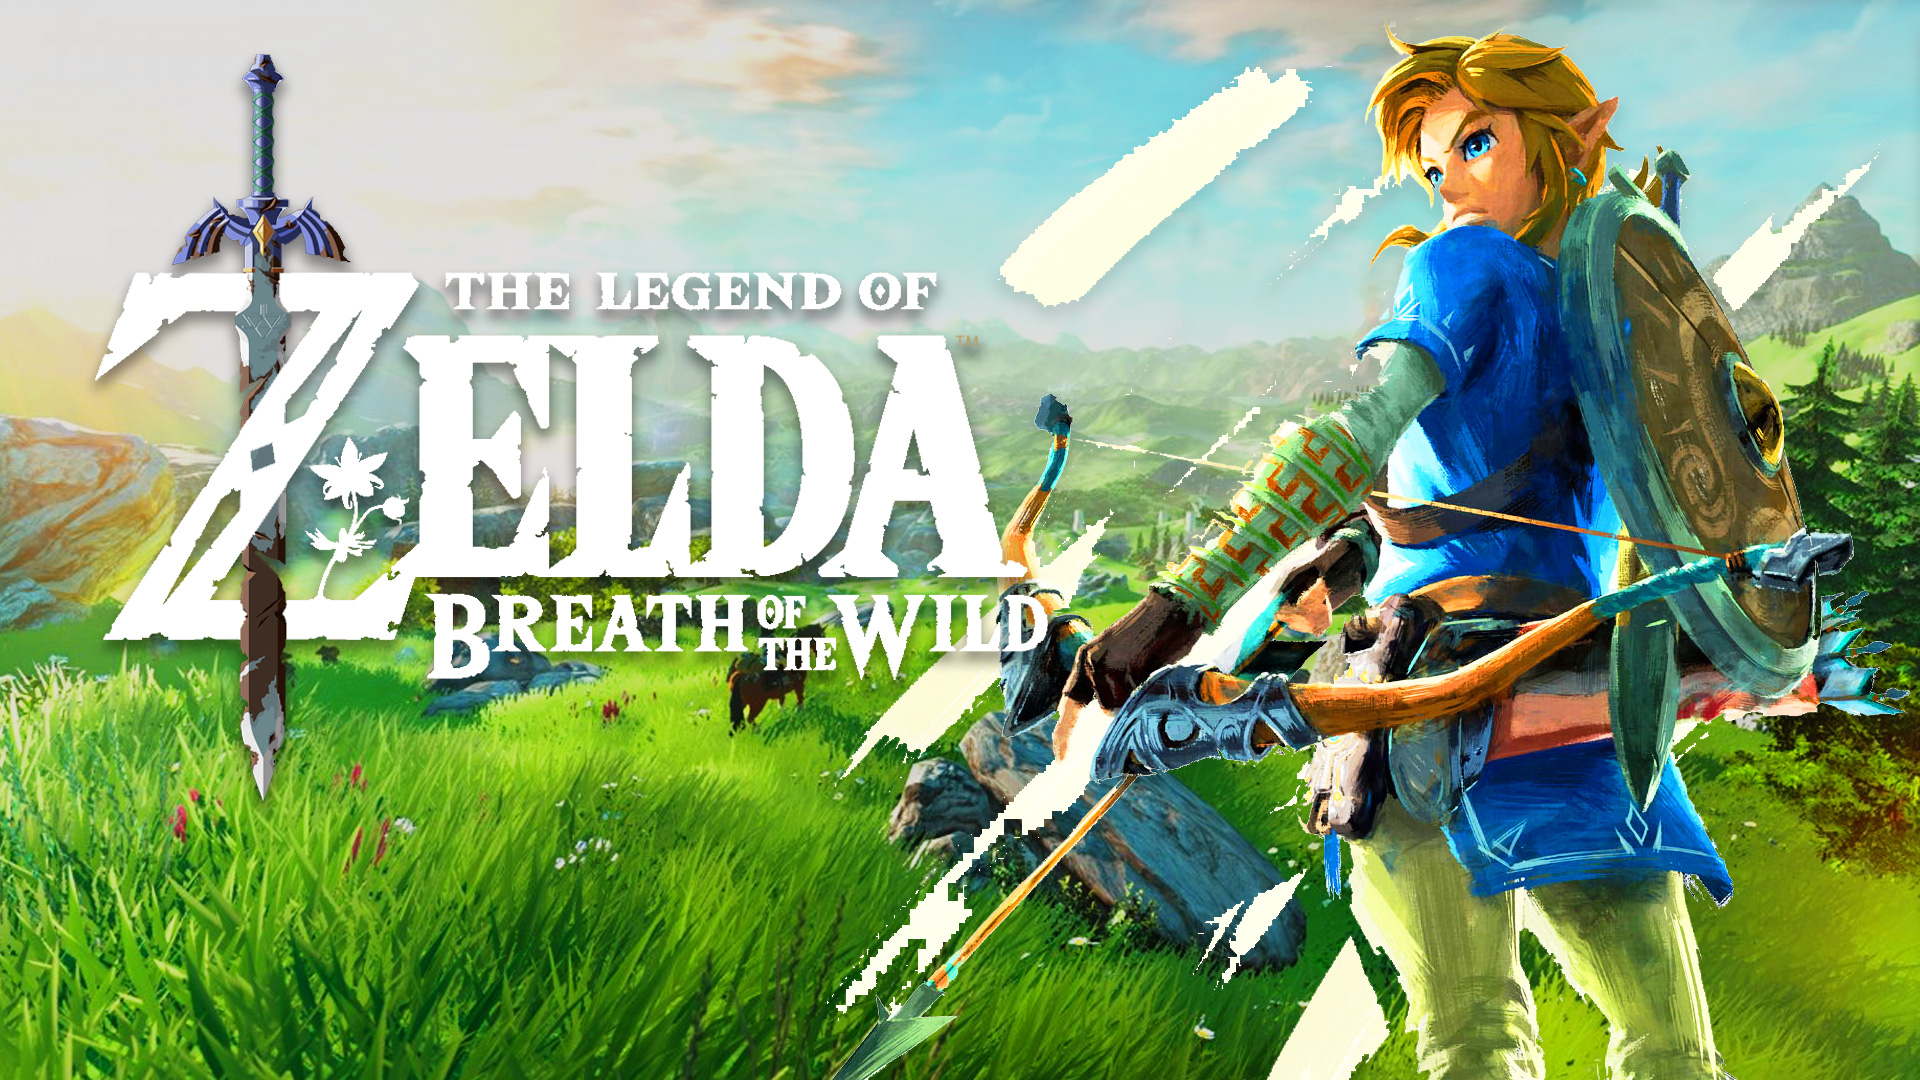 The legend of zelda breath of the wild steam фото 60